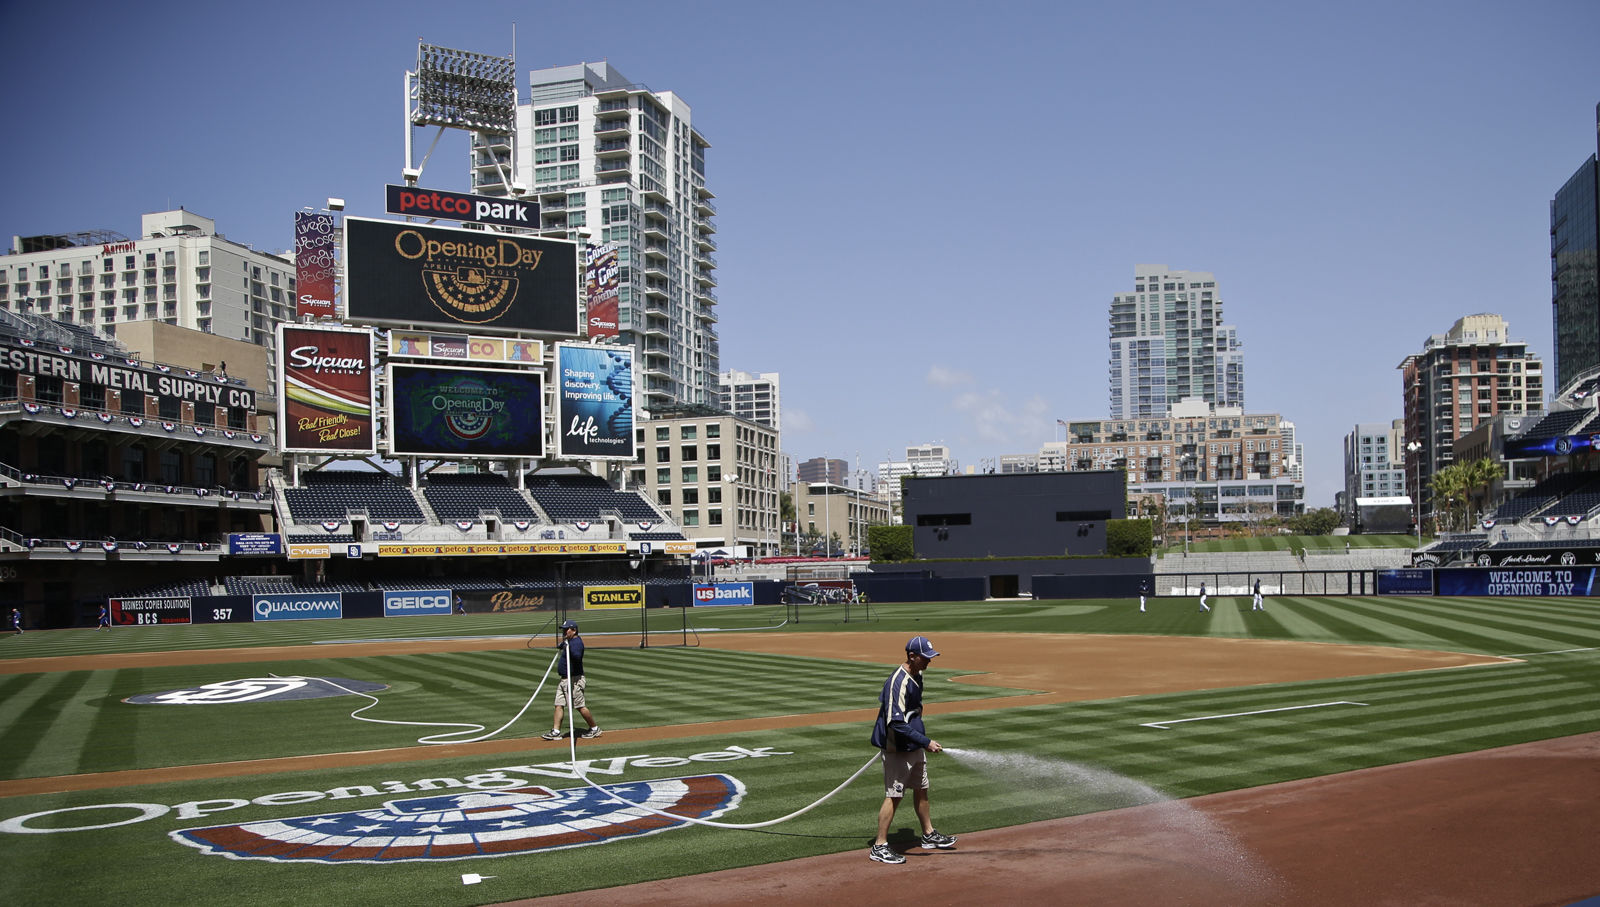 Petco Park, the home of the San Diego Padres, is No. 20 on the list. It costs $63 to see a Padres game in San Diego. File. (AP Photo/Lenny Ignelzi)